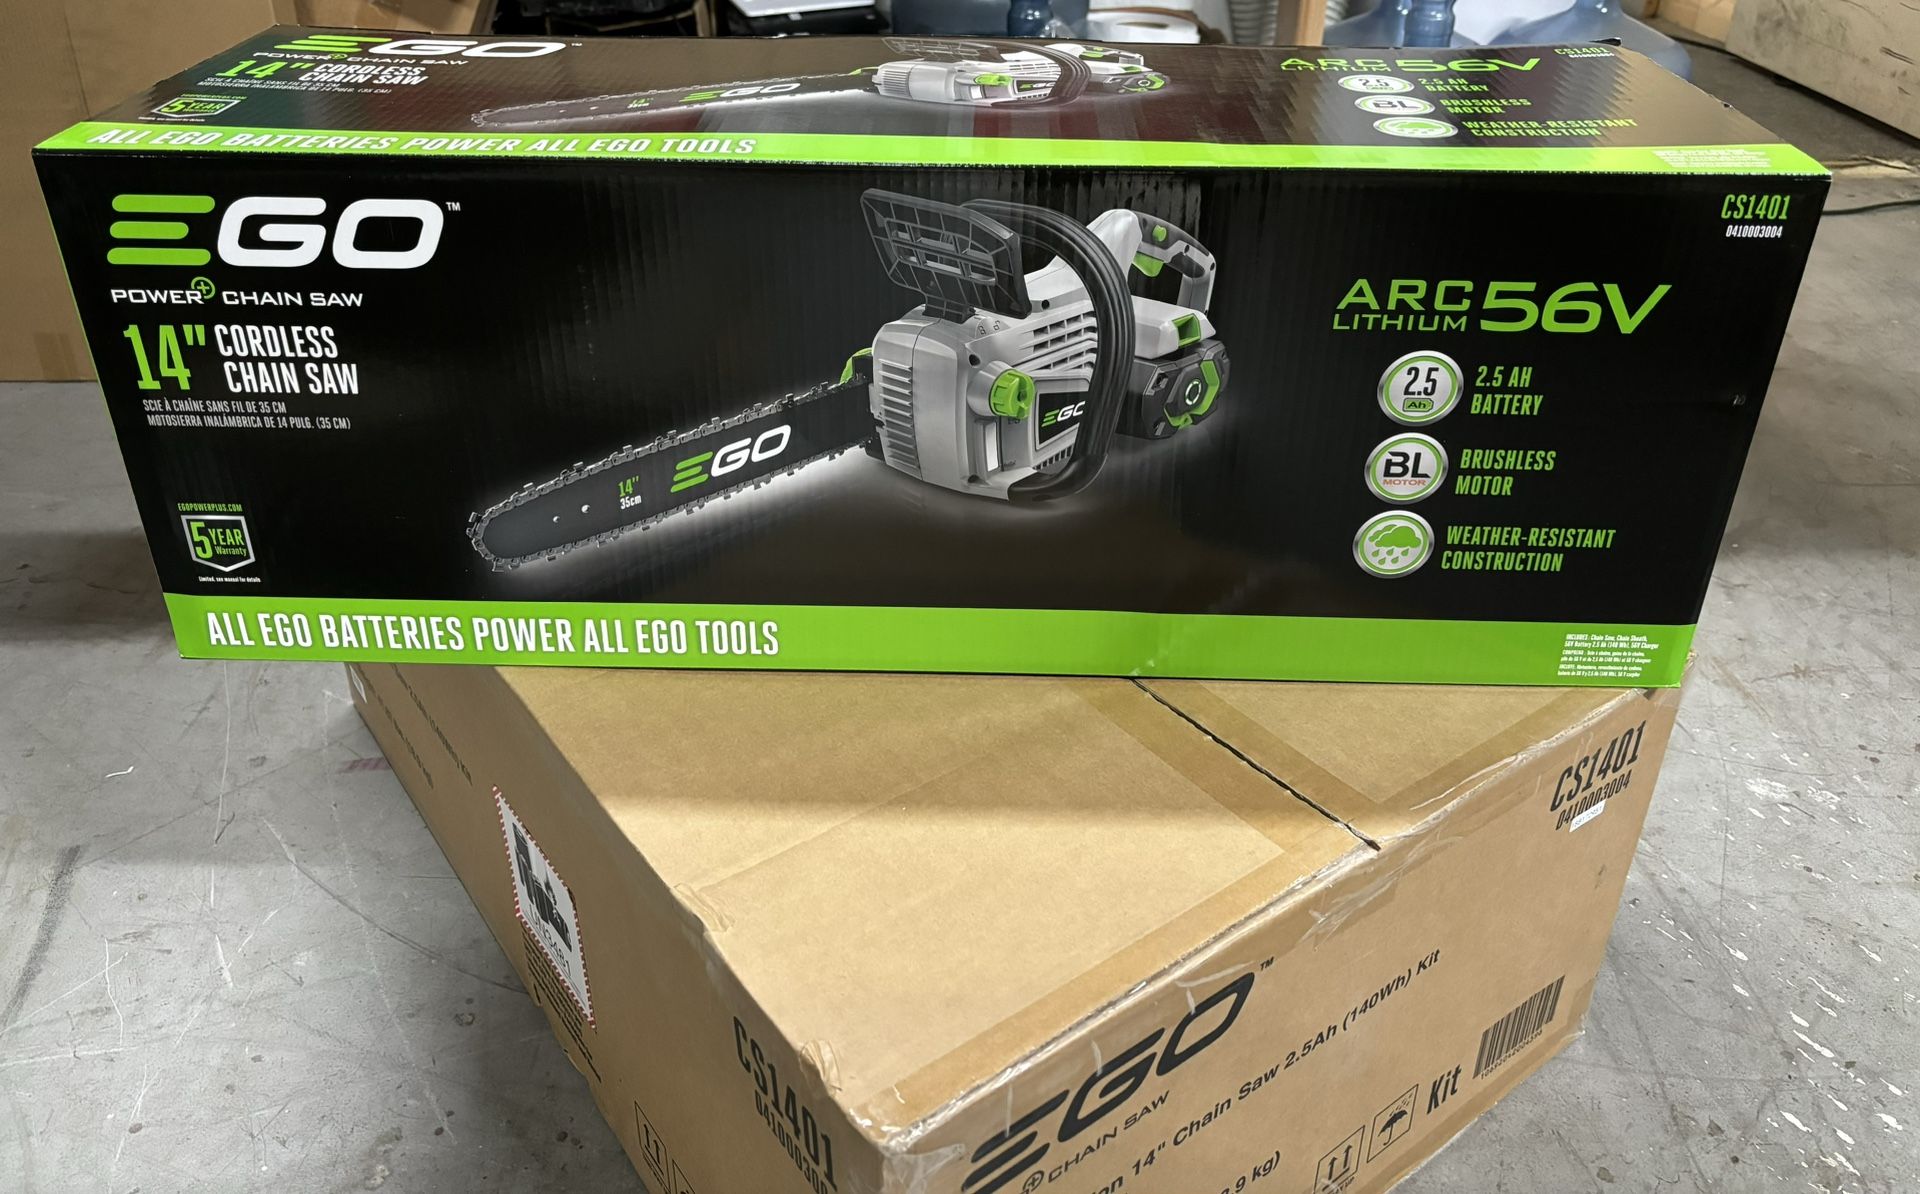 💯 EGO POWER+ 56-volt 14-in Brushless Battery 2.5 Ah Chainsaw 